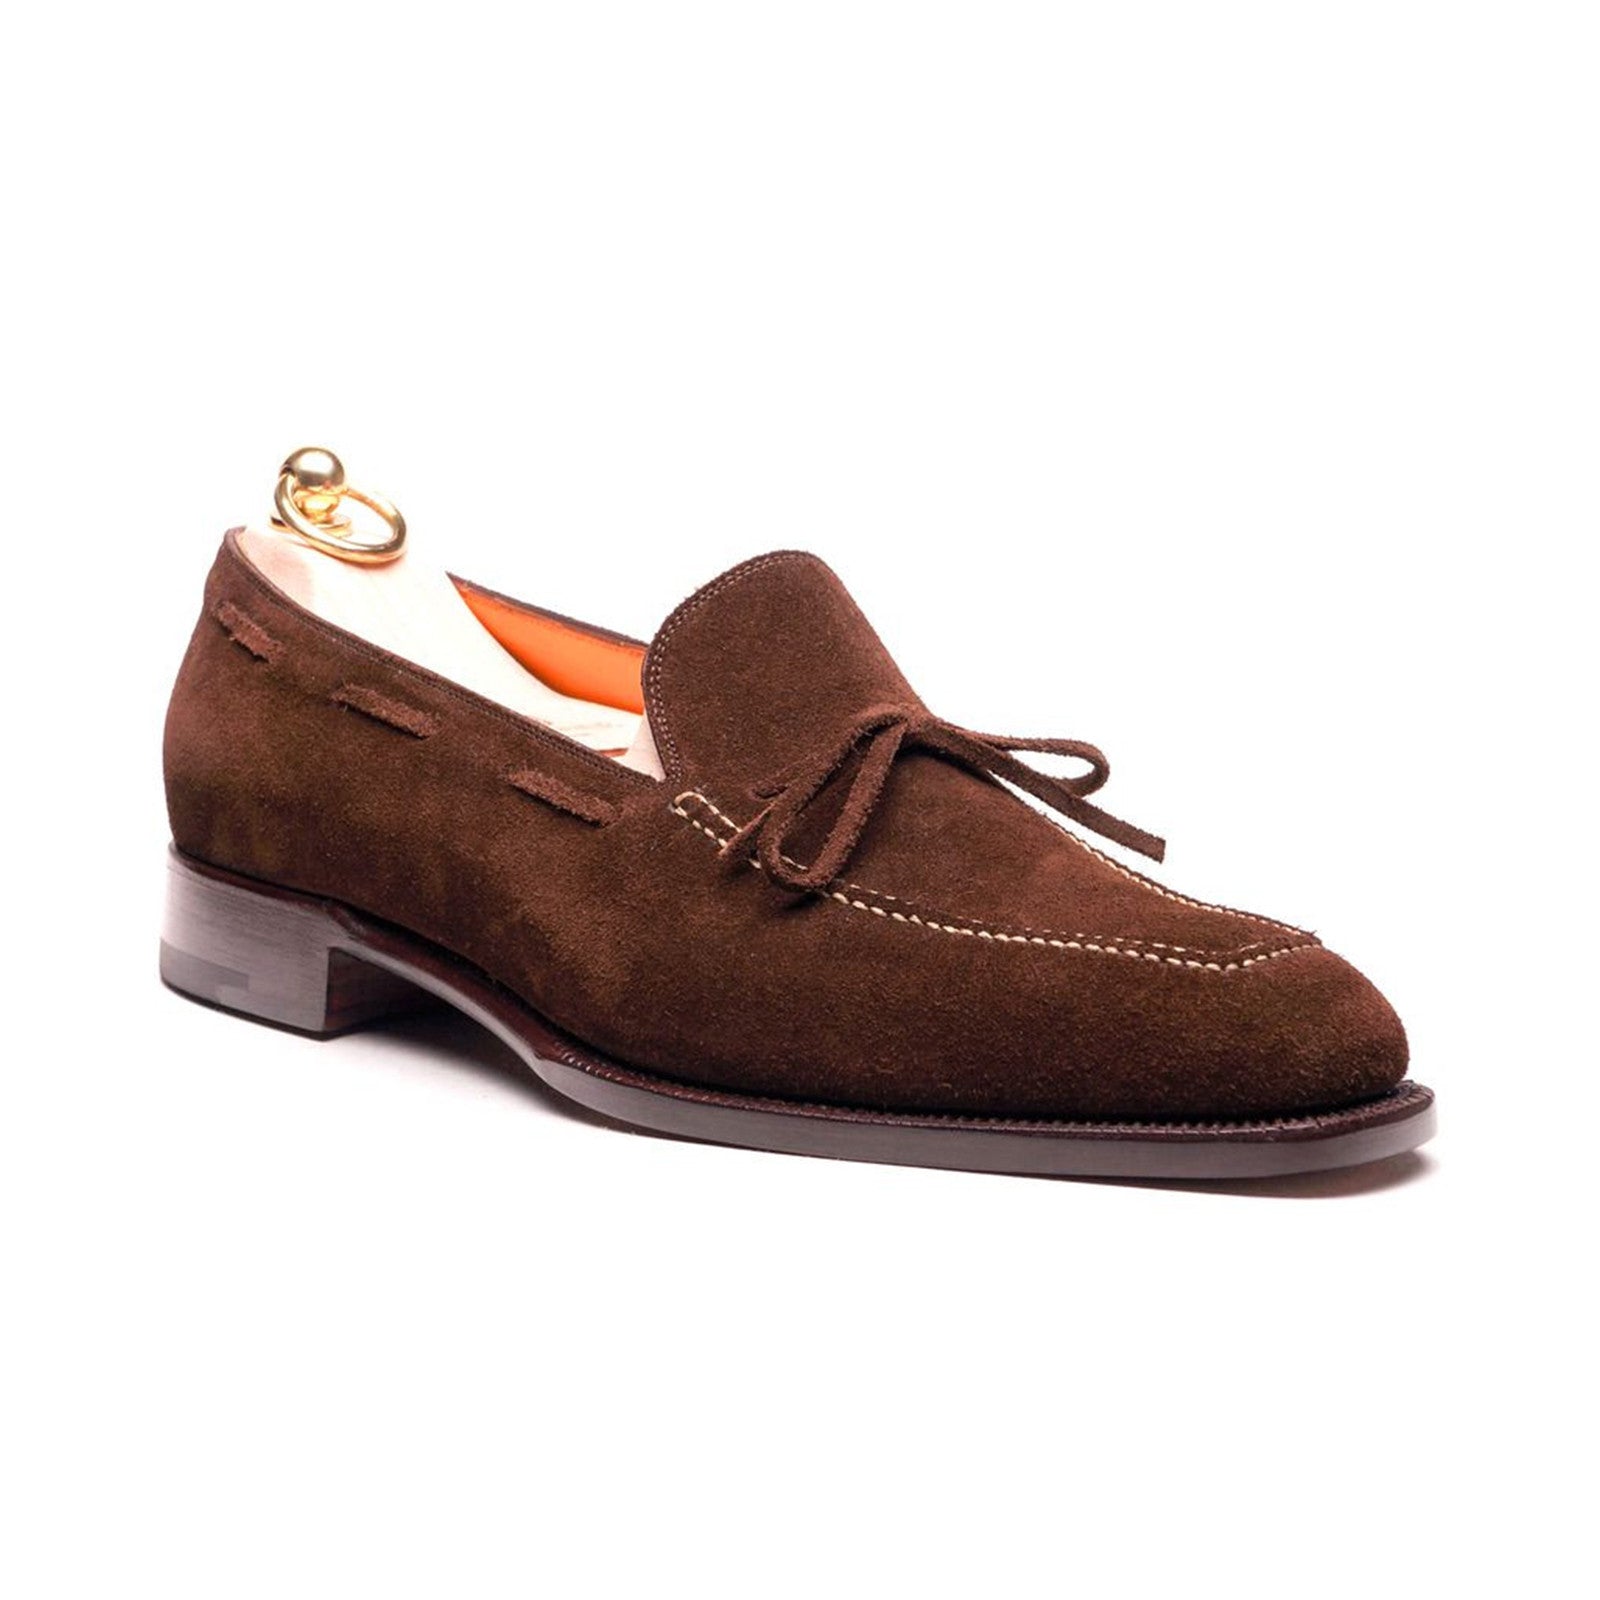 Stefano Bemer Style 1320 - Brown Suede - Default View